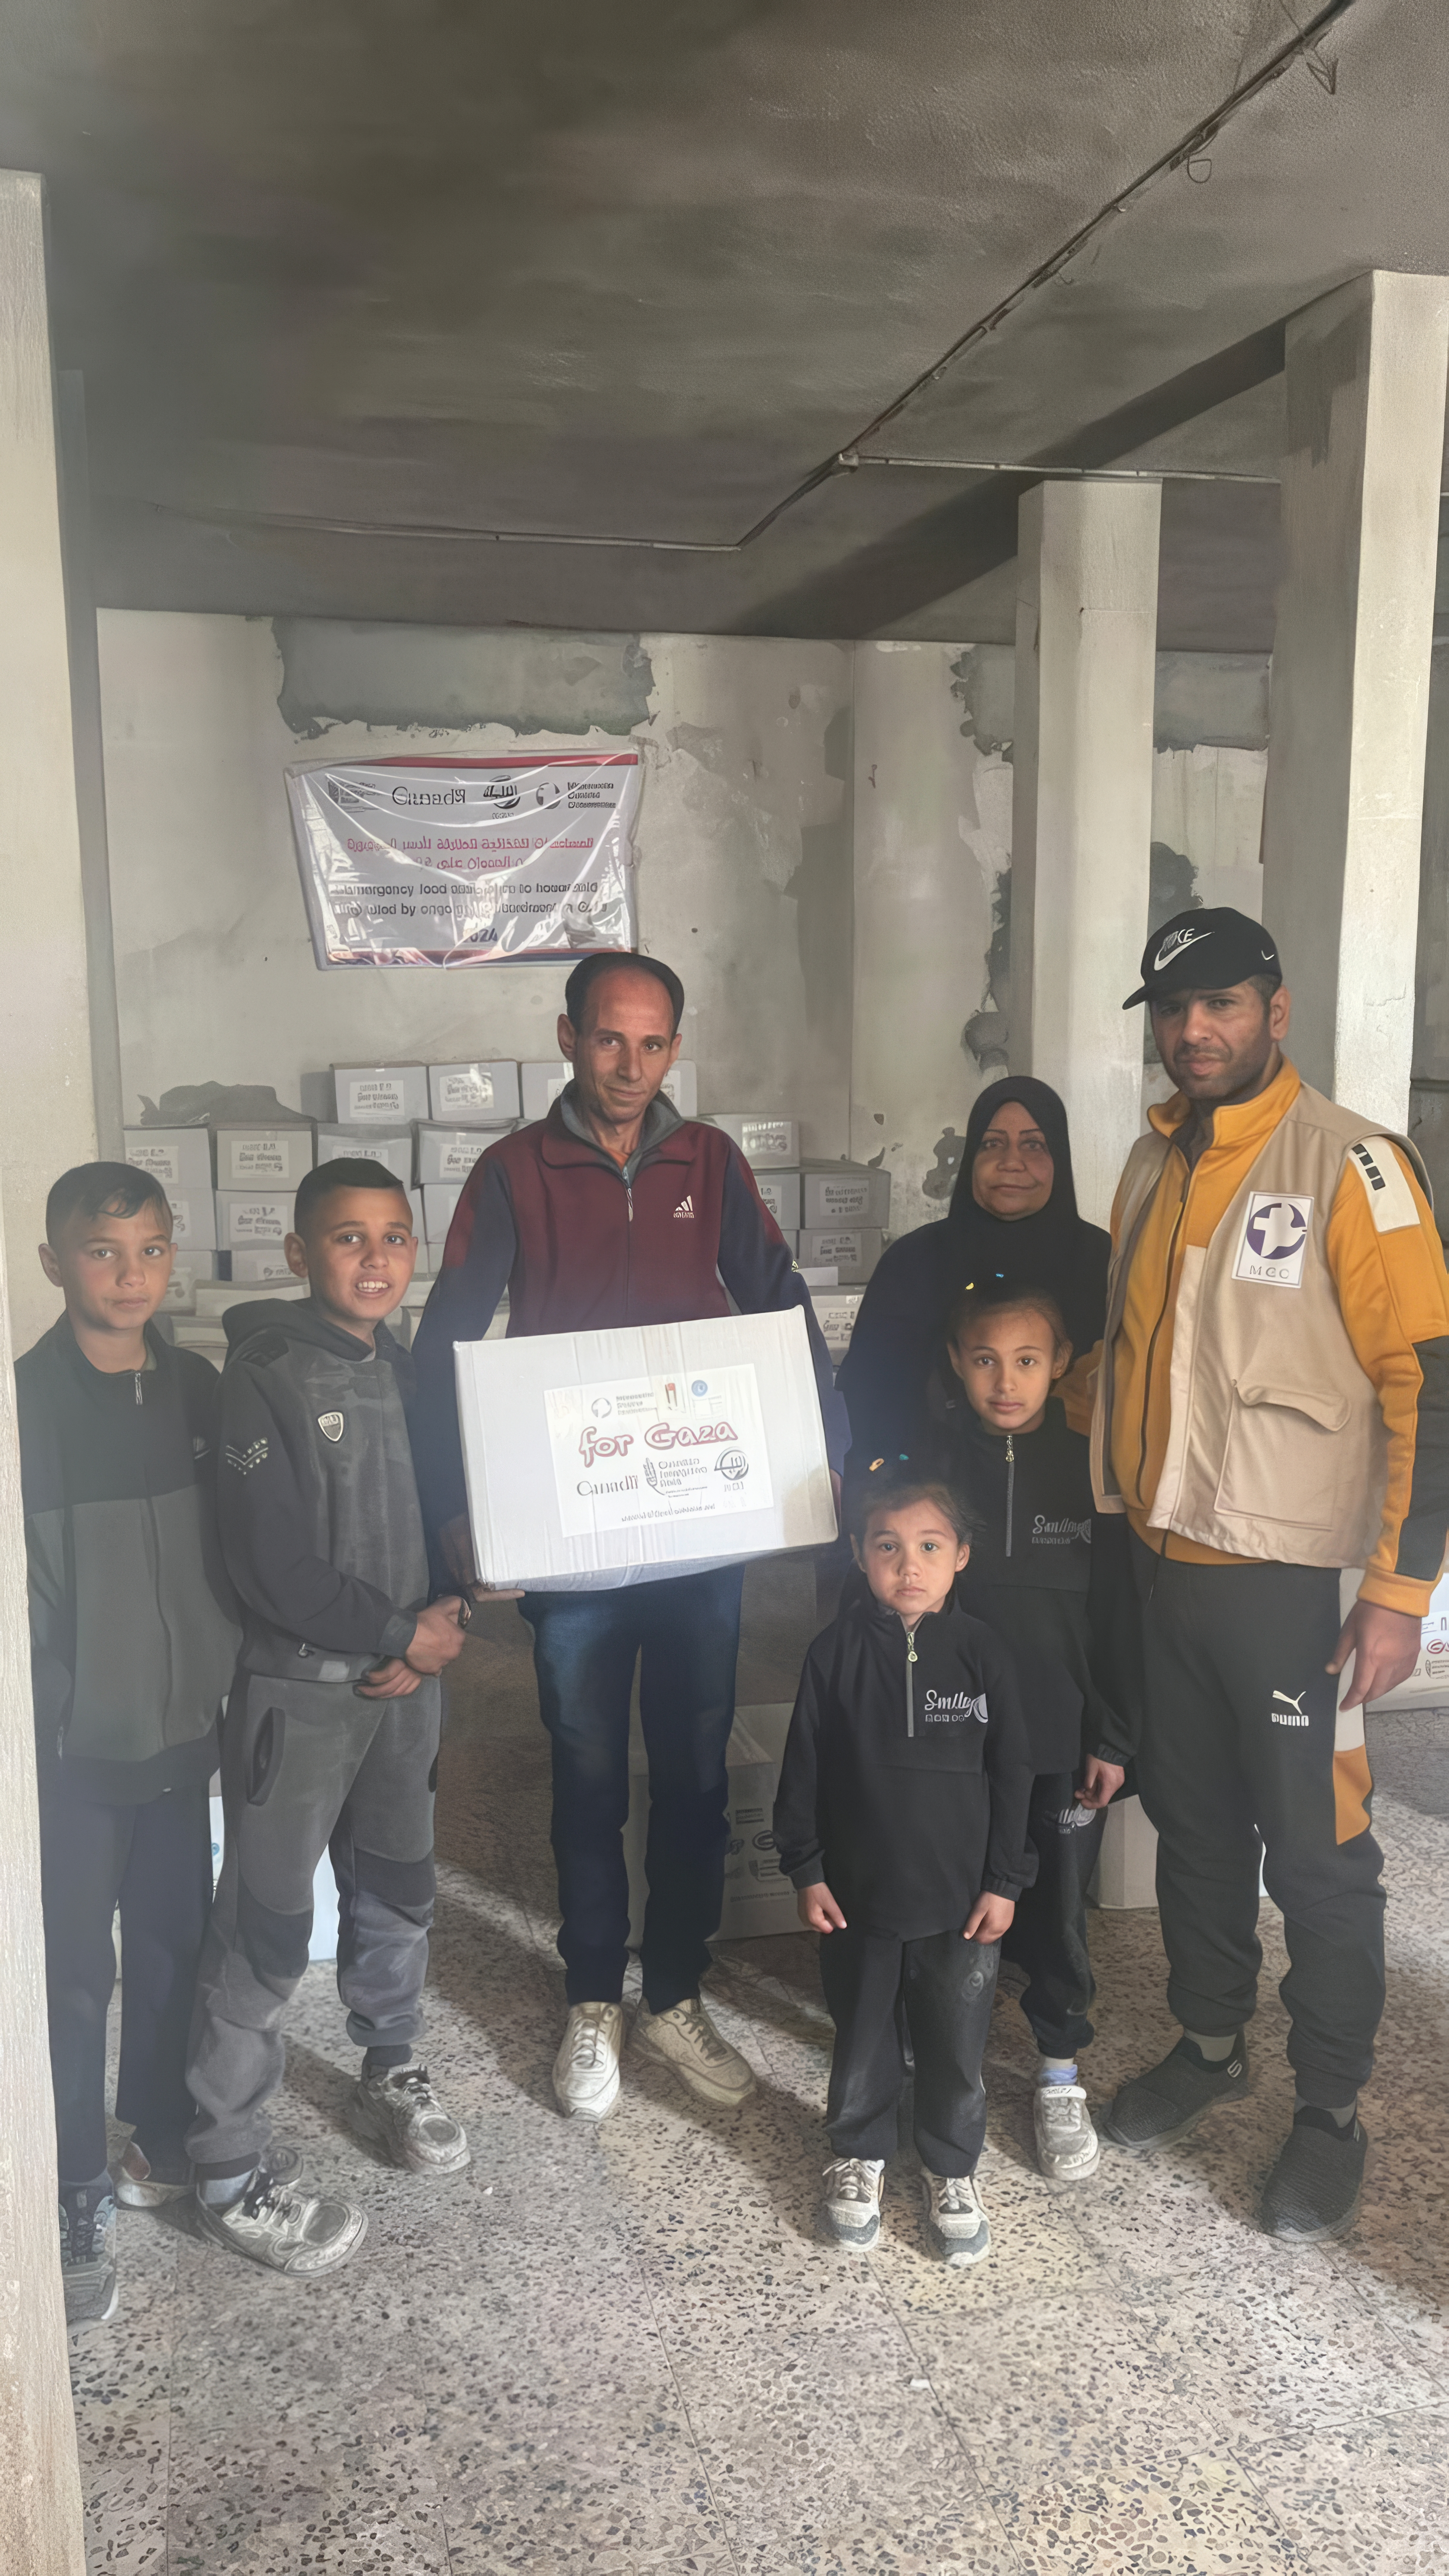 Al-Najd Developmental Forum staff distribute emergency food that has just arrived in Gaza for distribution to families. The shipment arrived on March 19 and was distributed on March 23.  *Names withheld for security reasons.